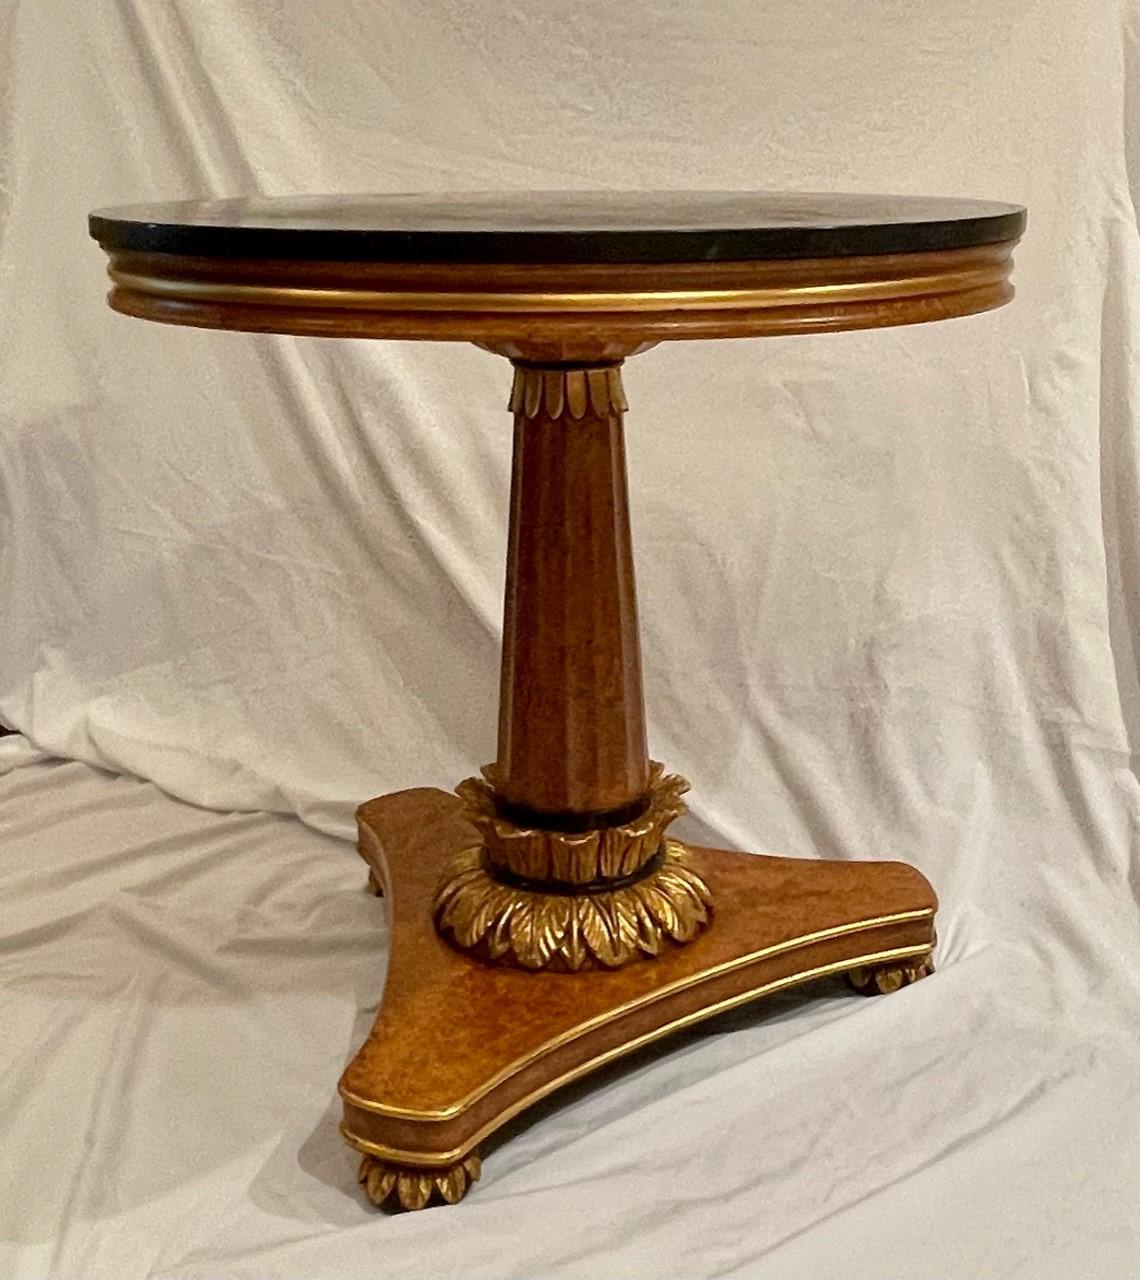 Biedermeier table carved Giltwood Marquina marble top. Invitinghome.

Luxury Biedermeier style round wood table with carved leaf motif. The table has hand painted faux burl finish and antique gold leaf trim. The round table has a black Marquina